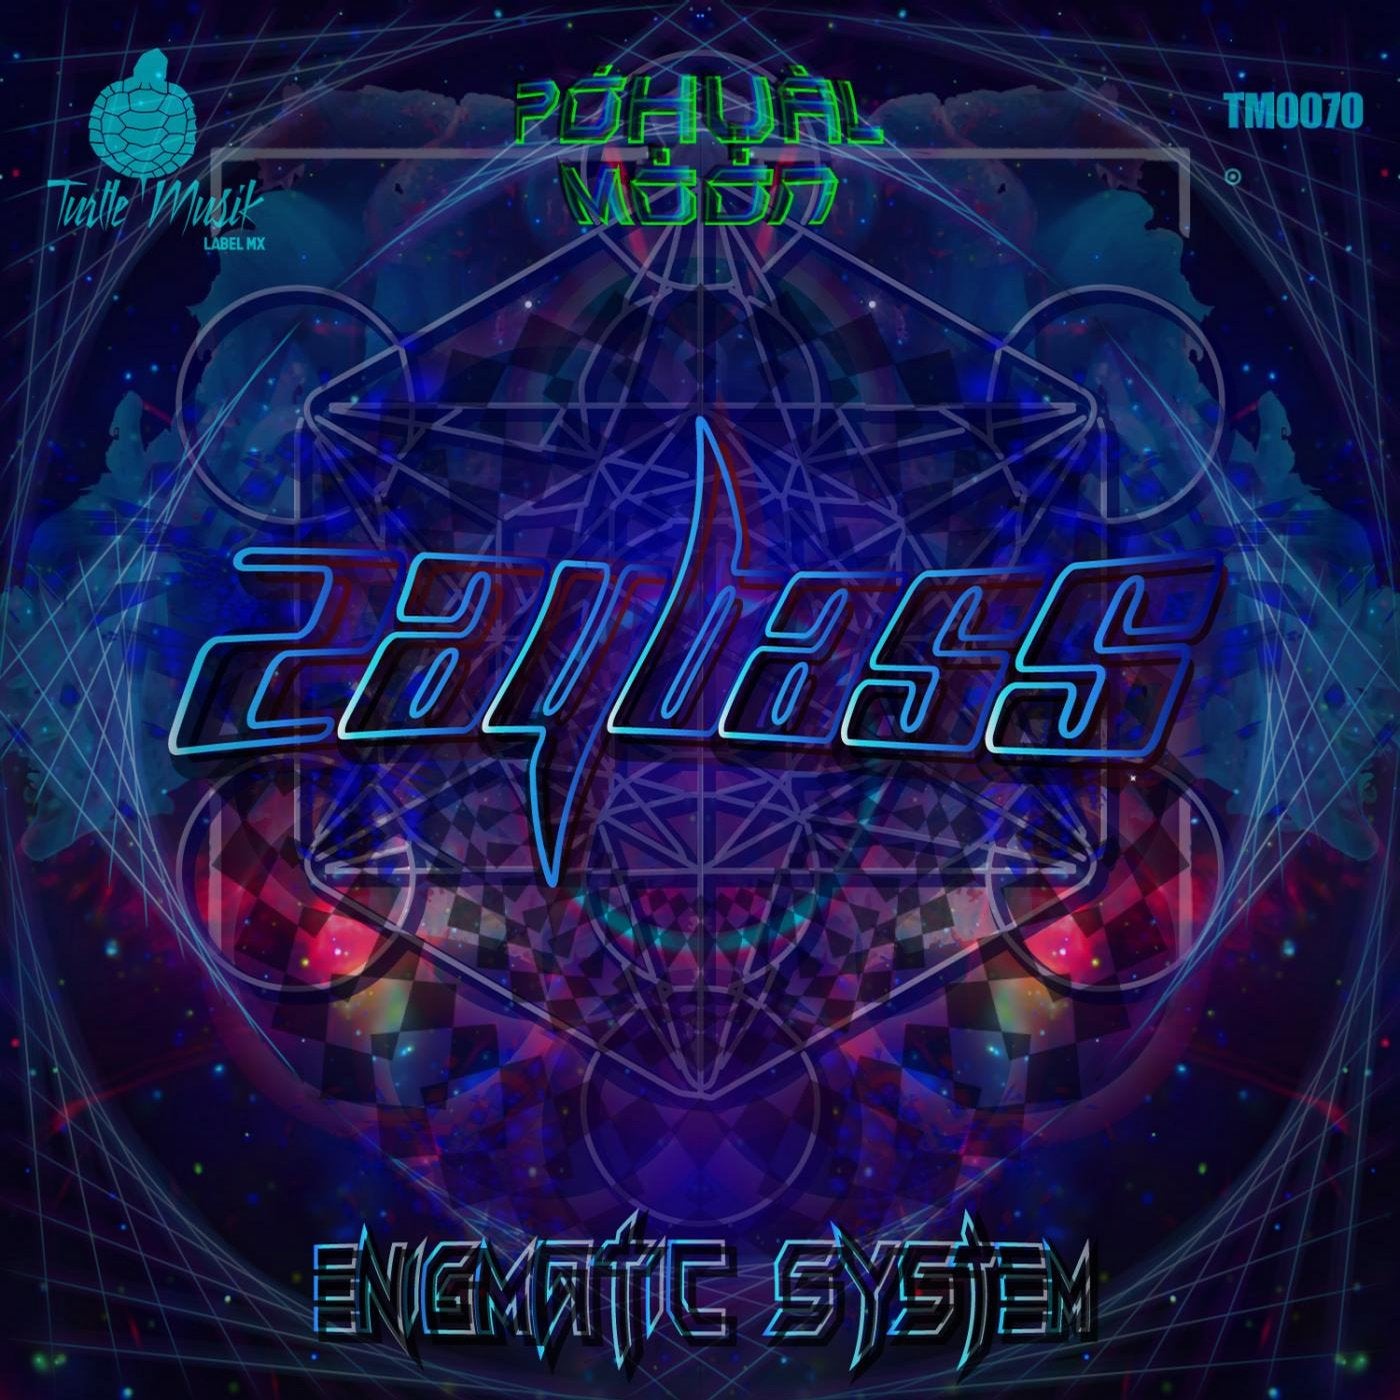 Enigmatic System EP